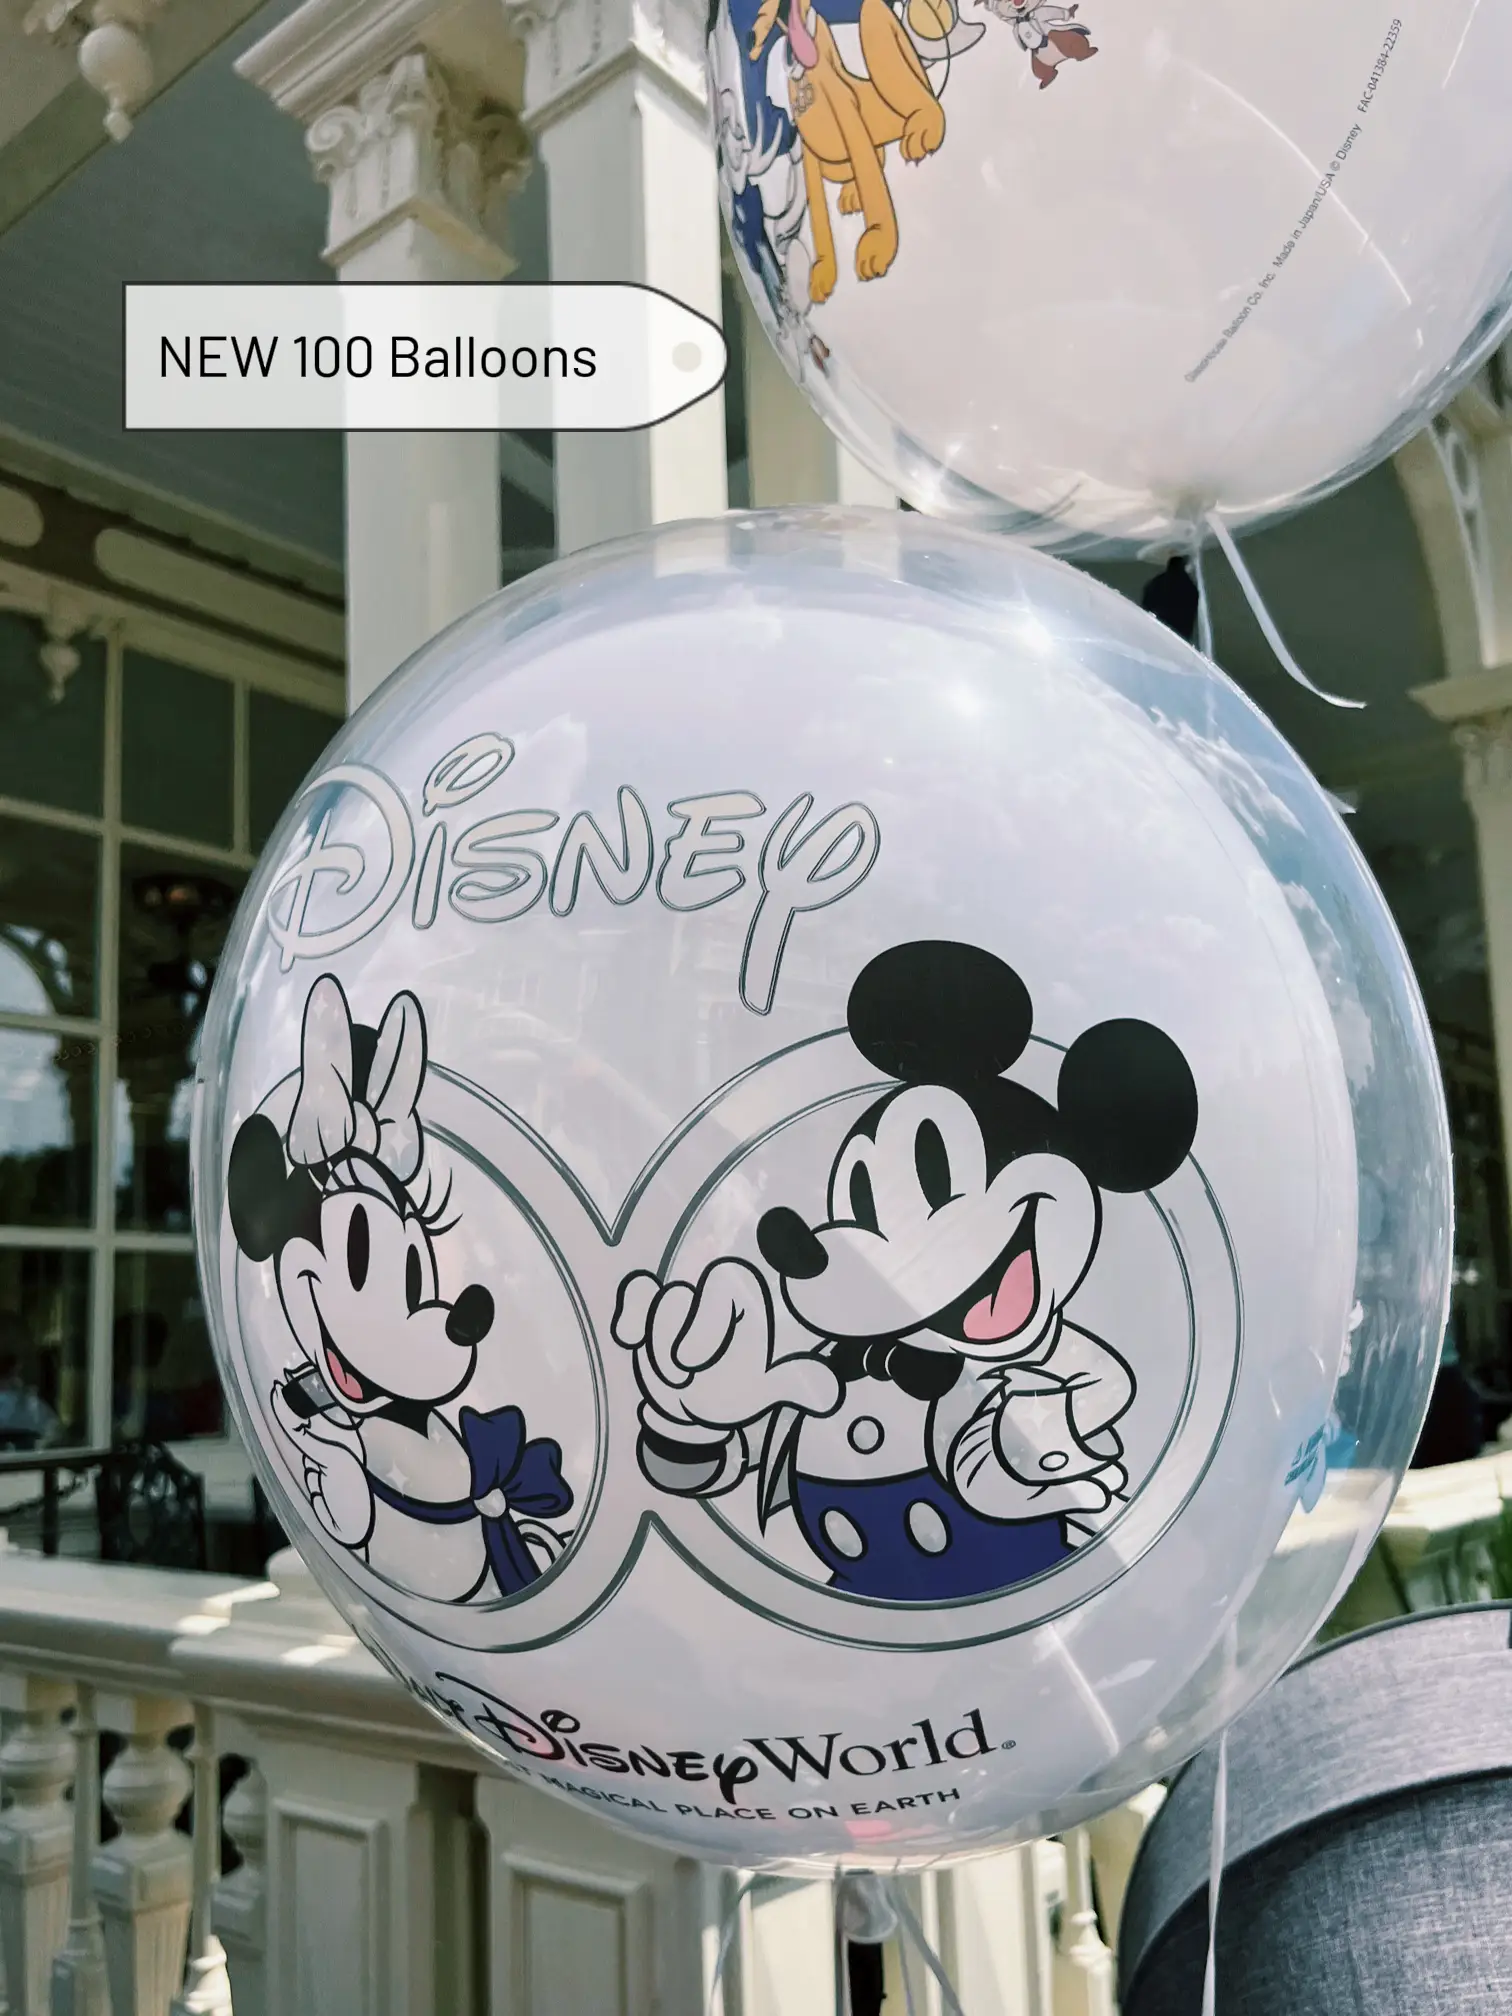 Disney Balloons, Gallery posted by arihoey